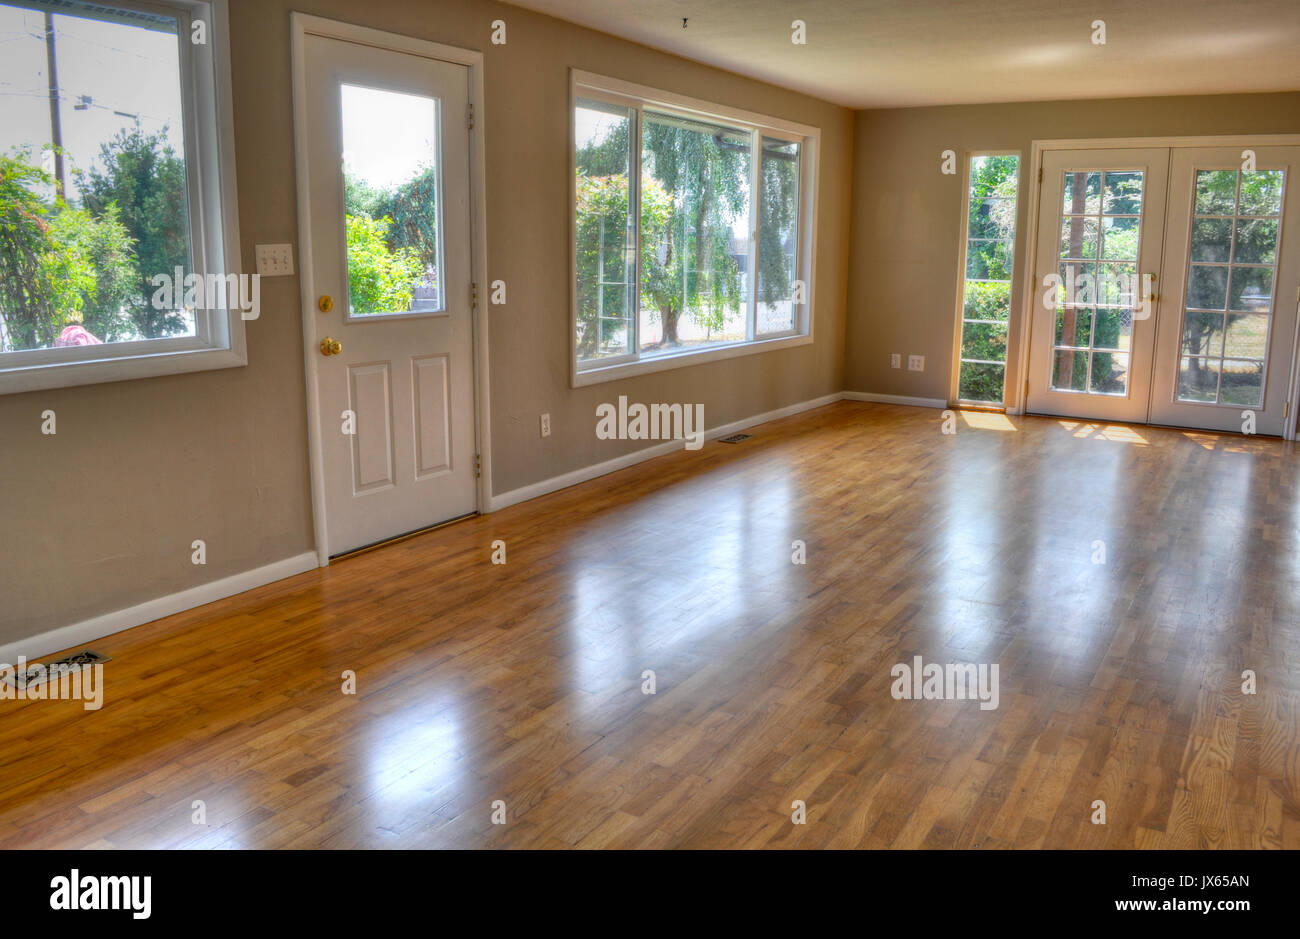 Interior empty living room with no furniture and no people.  Residential with front door and French glass doors and hardwood floors. Stock Photo